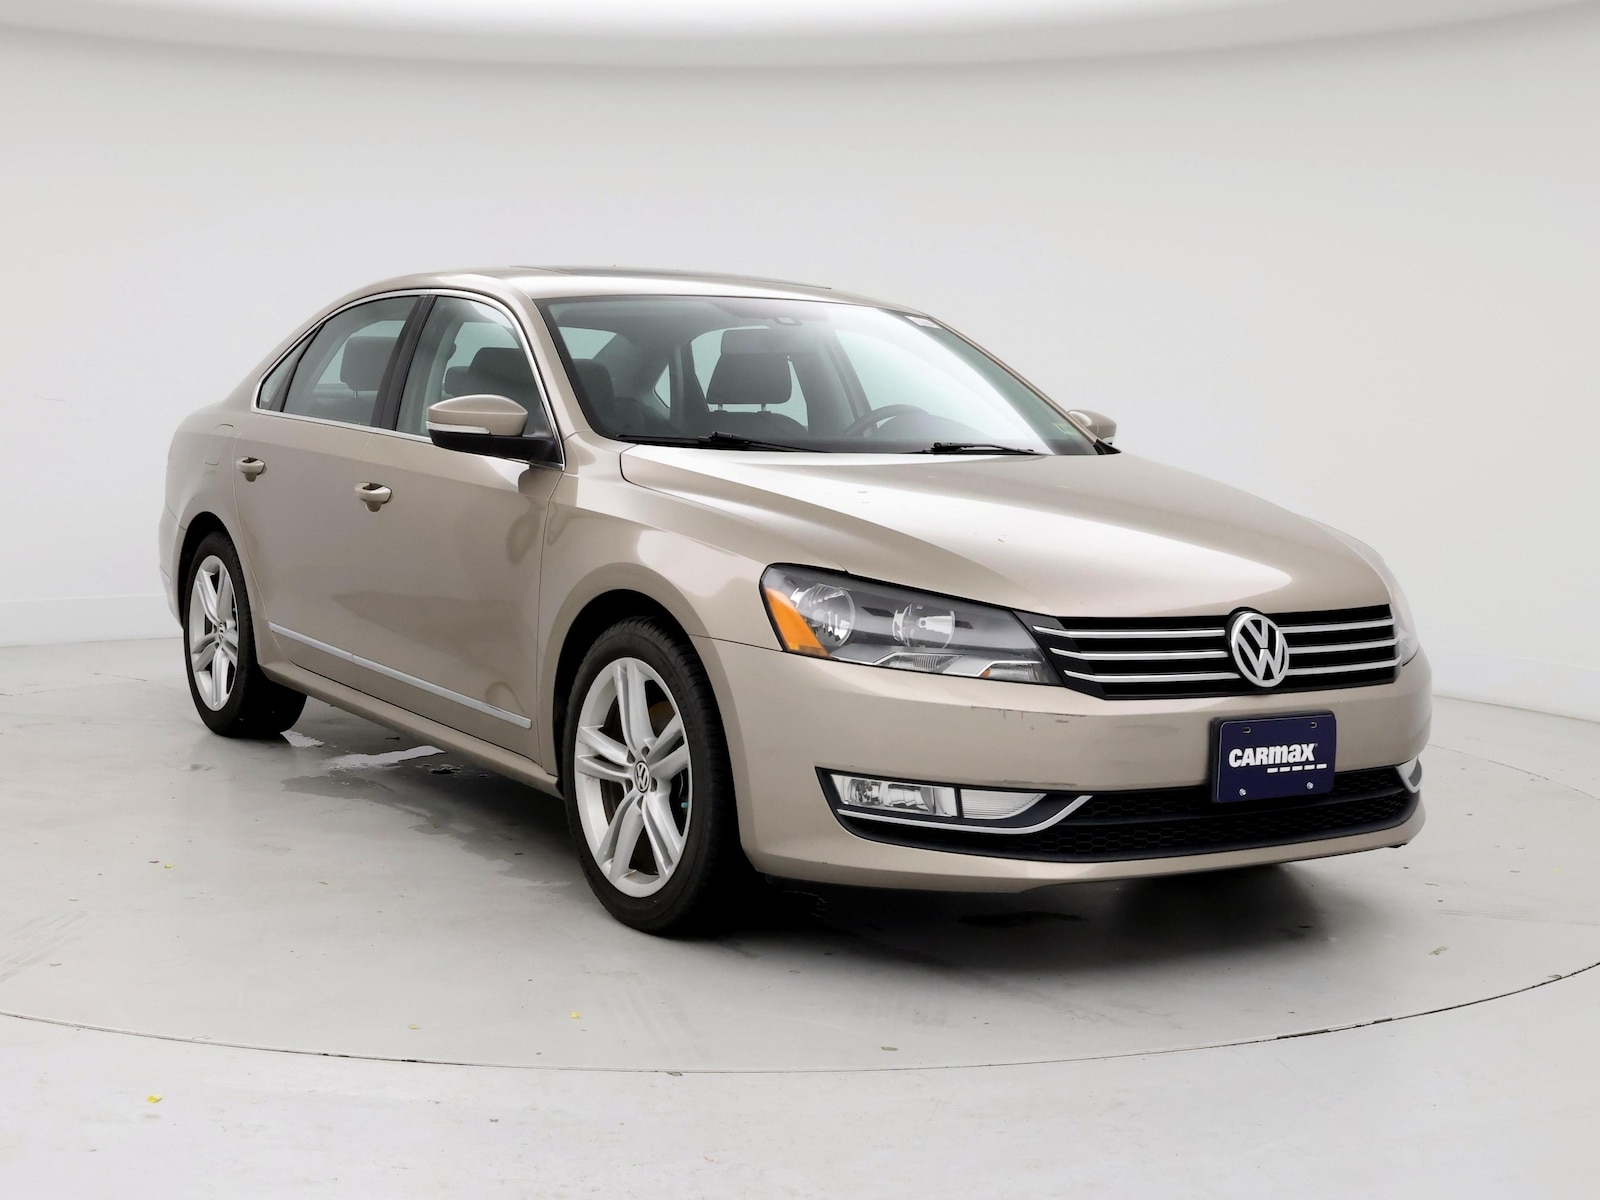 Used 2015 Volkswagen Passat SE with VIN 1VWBS7A33FC064543 for sale in Spokane Valley, WA